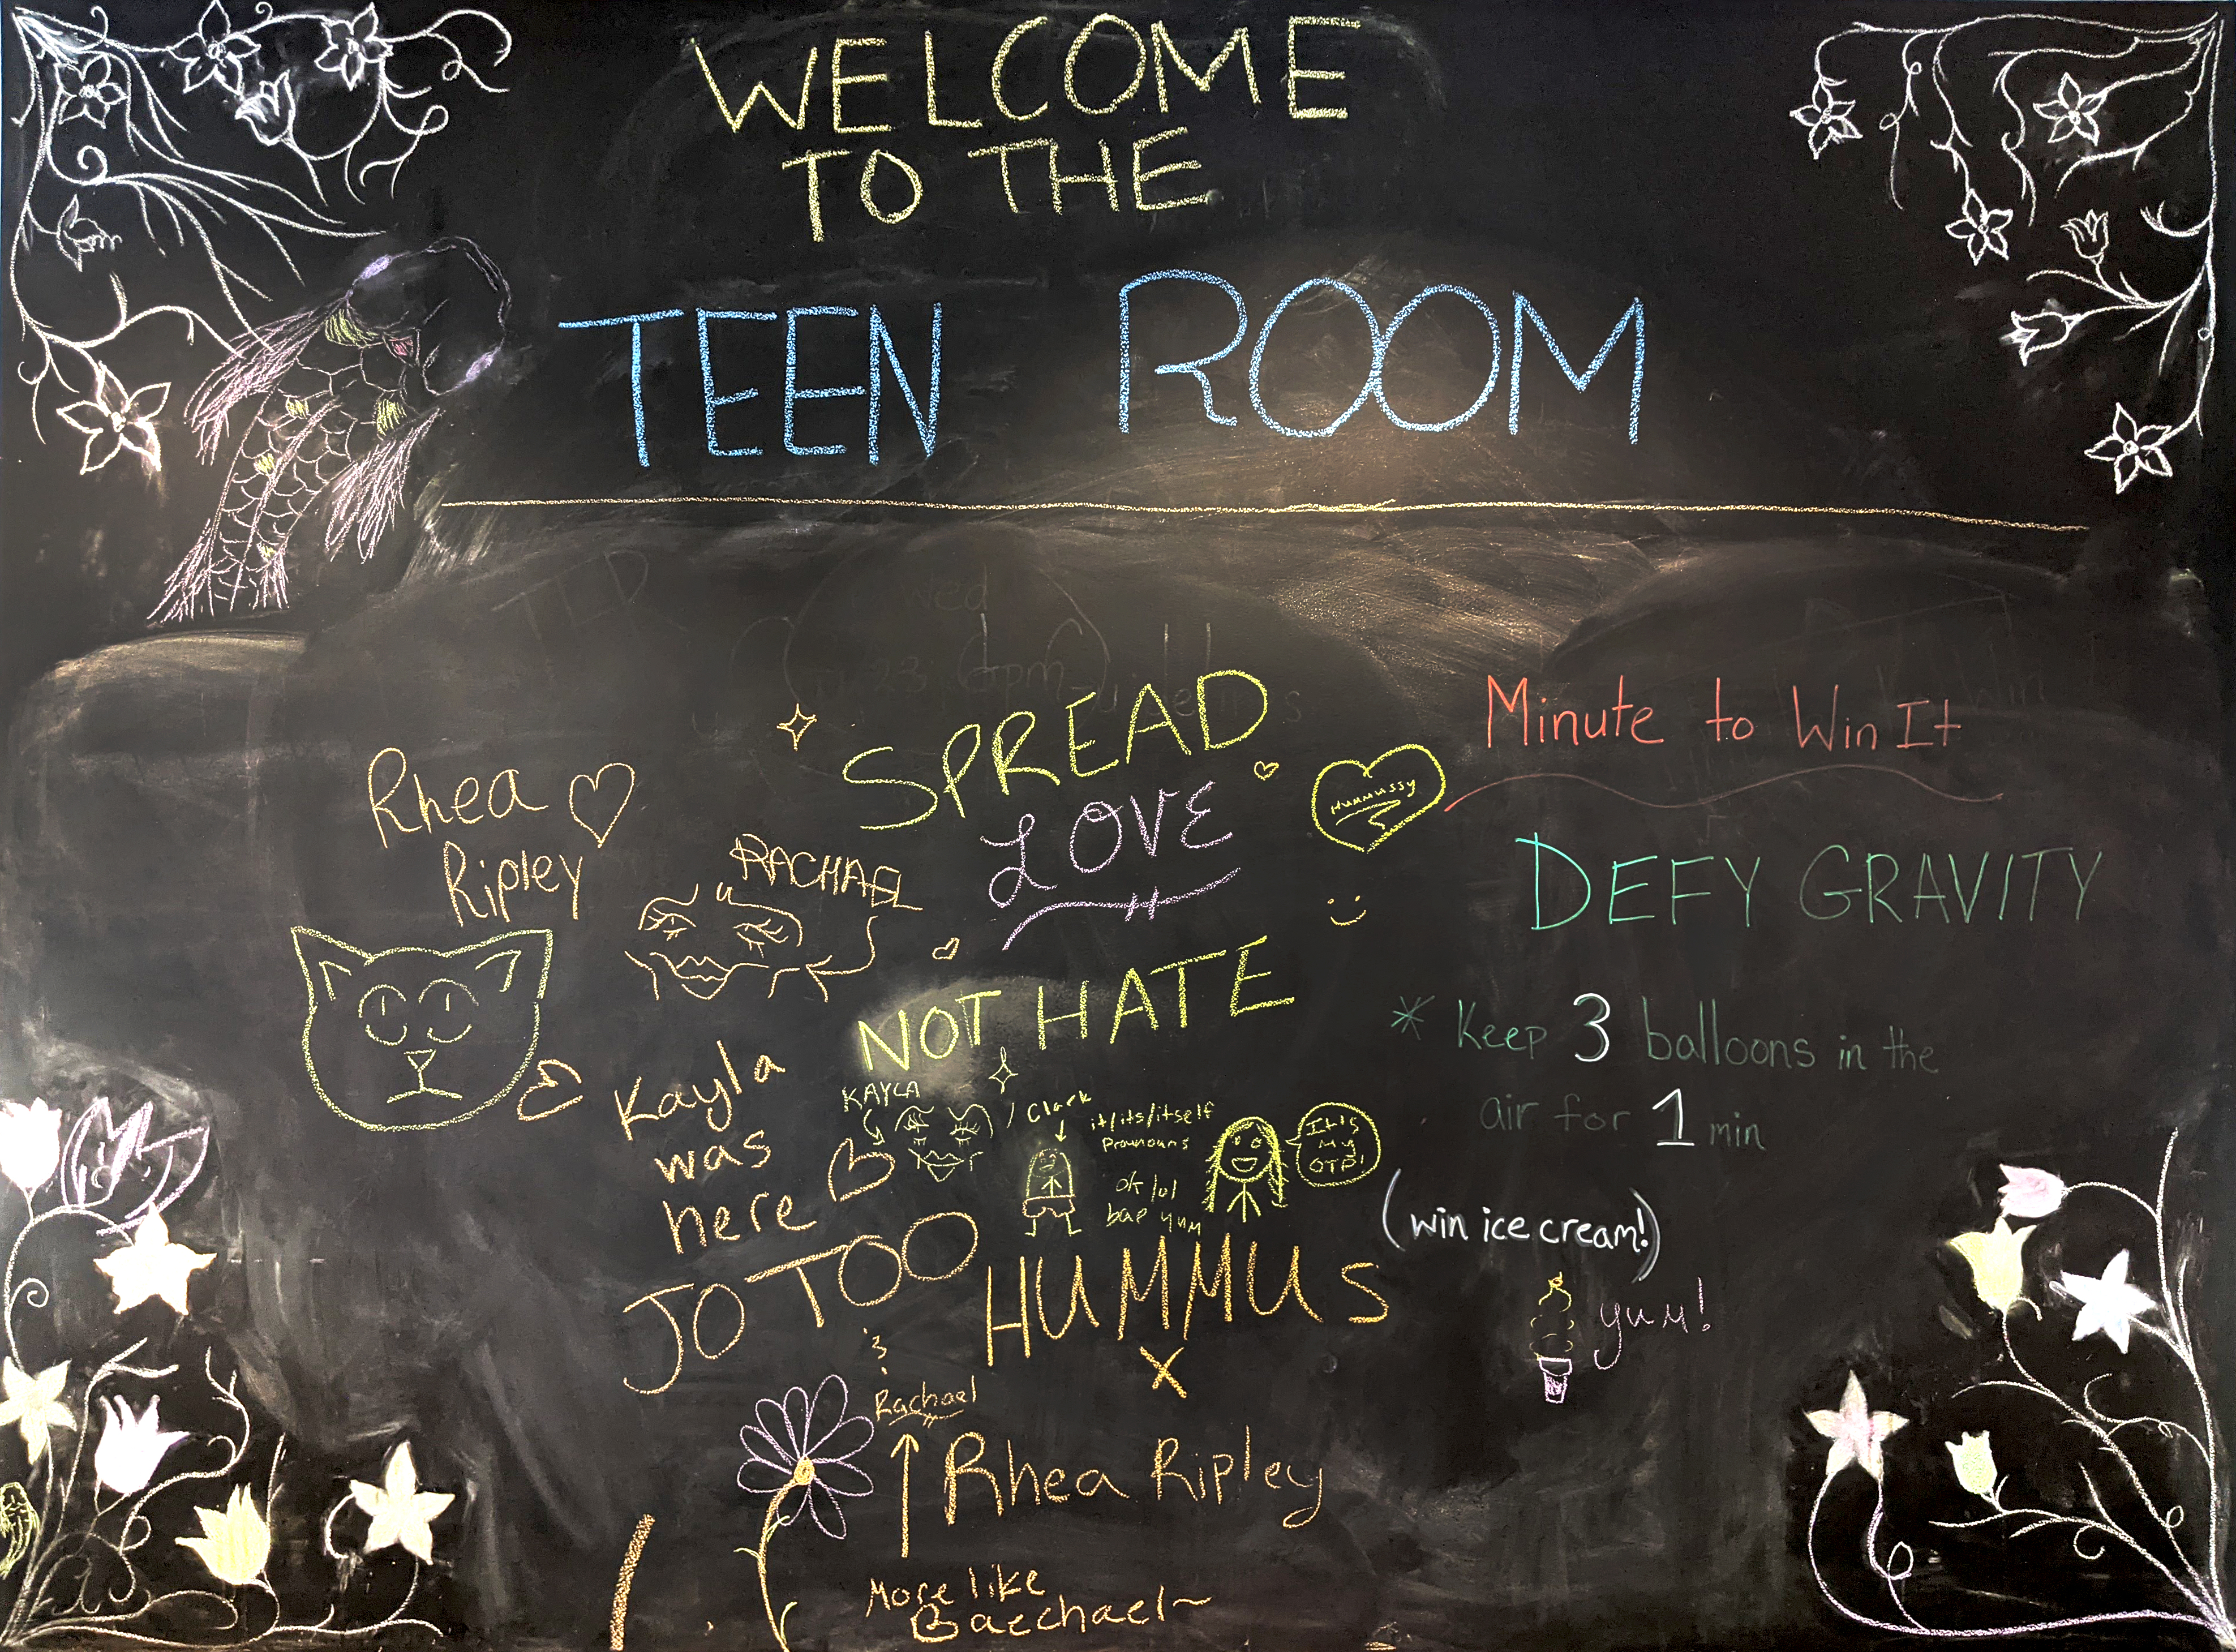 Announcement chalkboard with fancy artwork and random writings by staff and patrons alike.